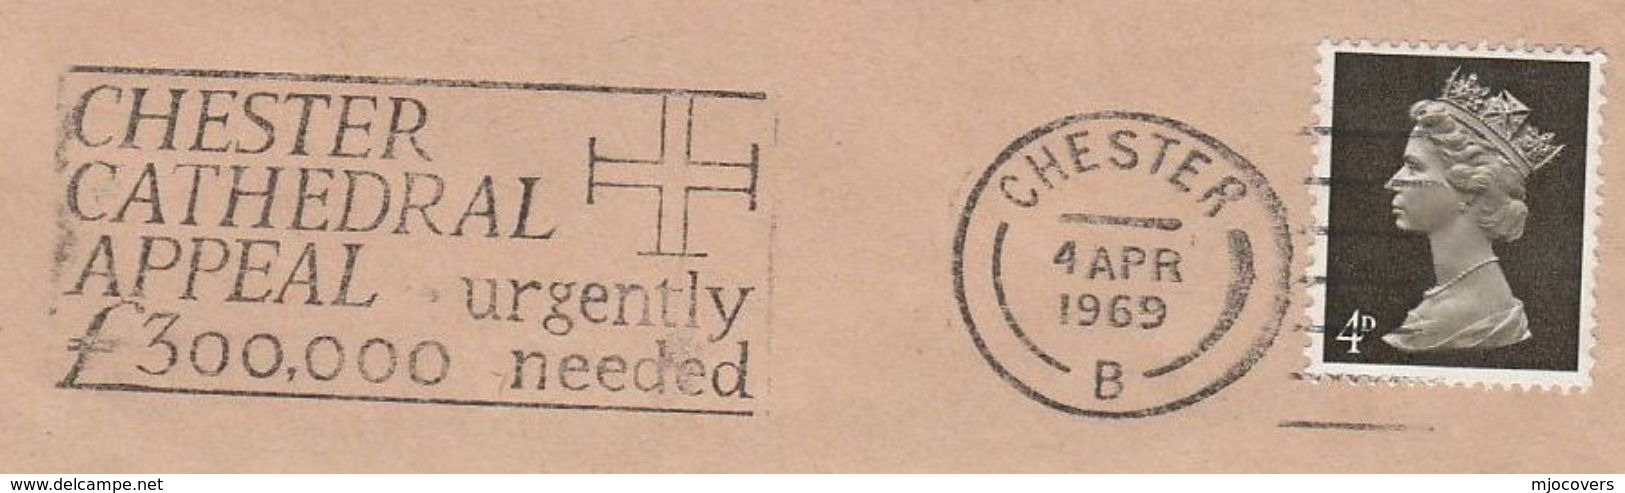 1969 Cover CHESTER CATHEDRAL APPEAL Illus CROSS, Gb Slogan Religion Stamps Christianity - Christianity